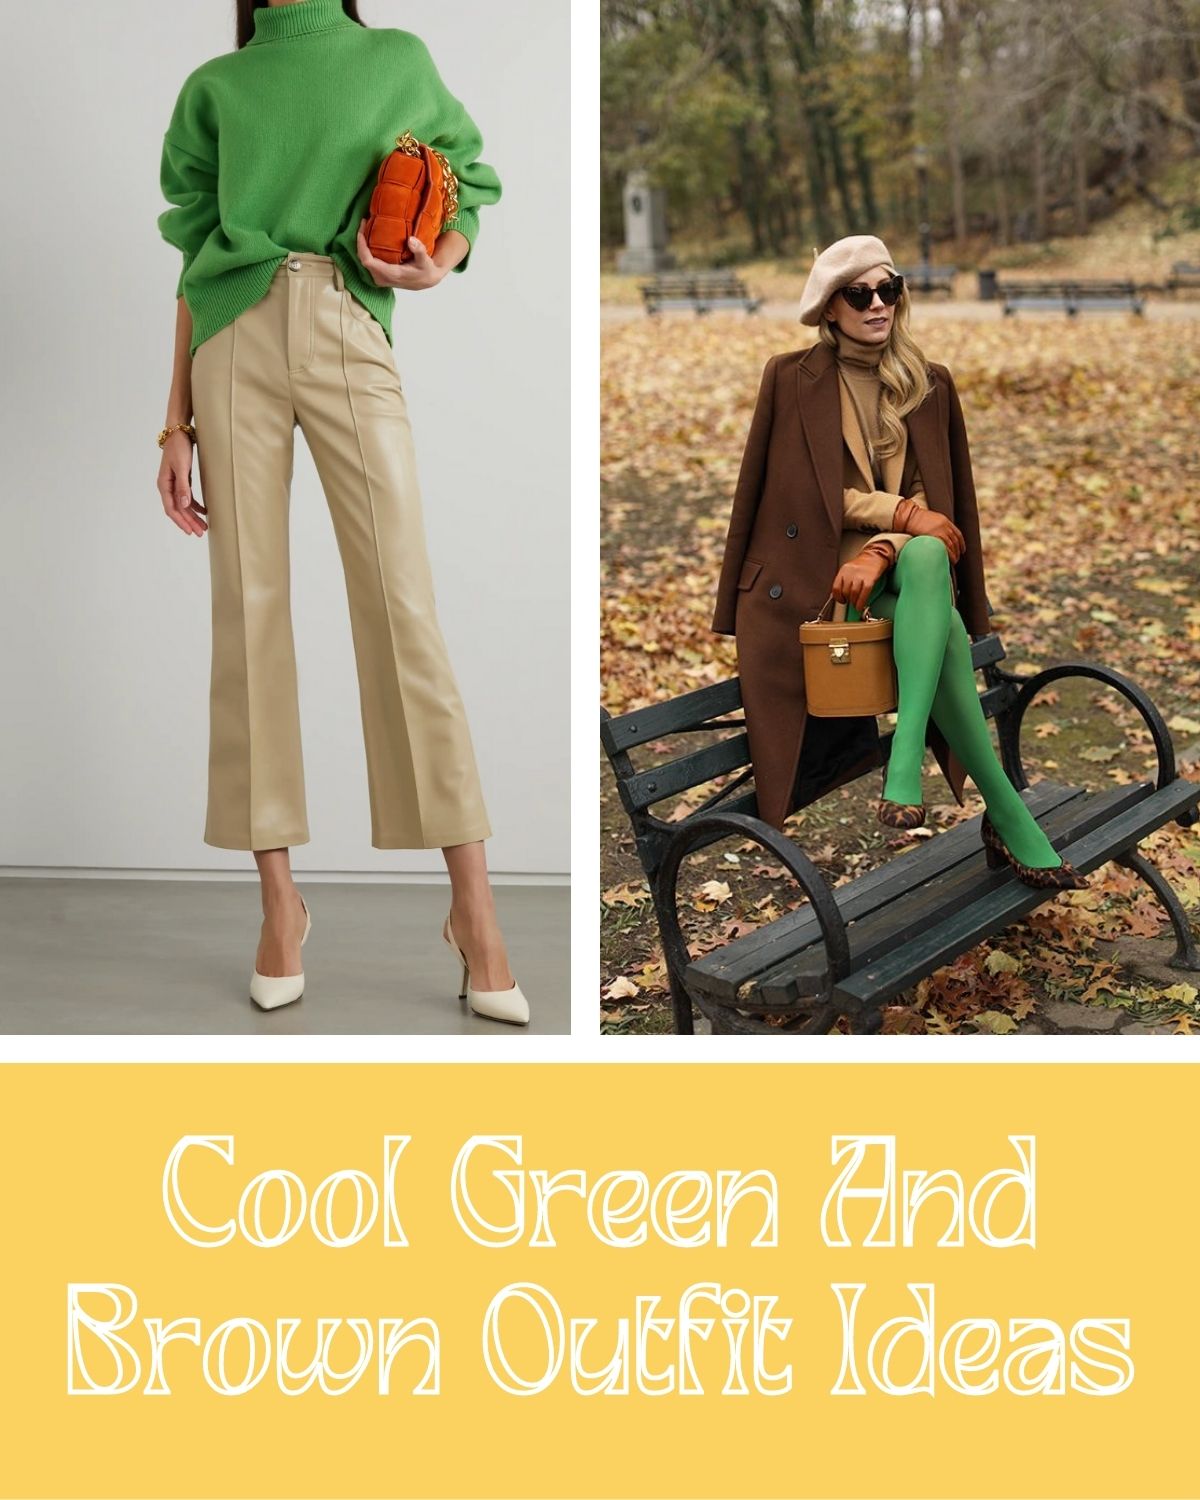 Cool green and brown outfit ideas for fall